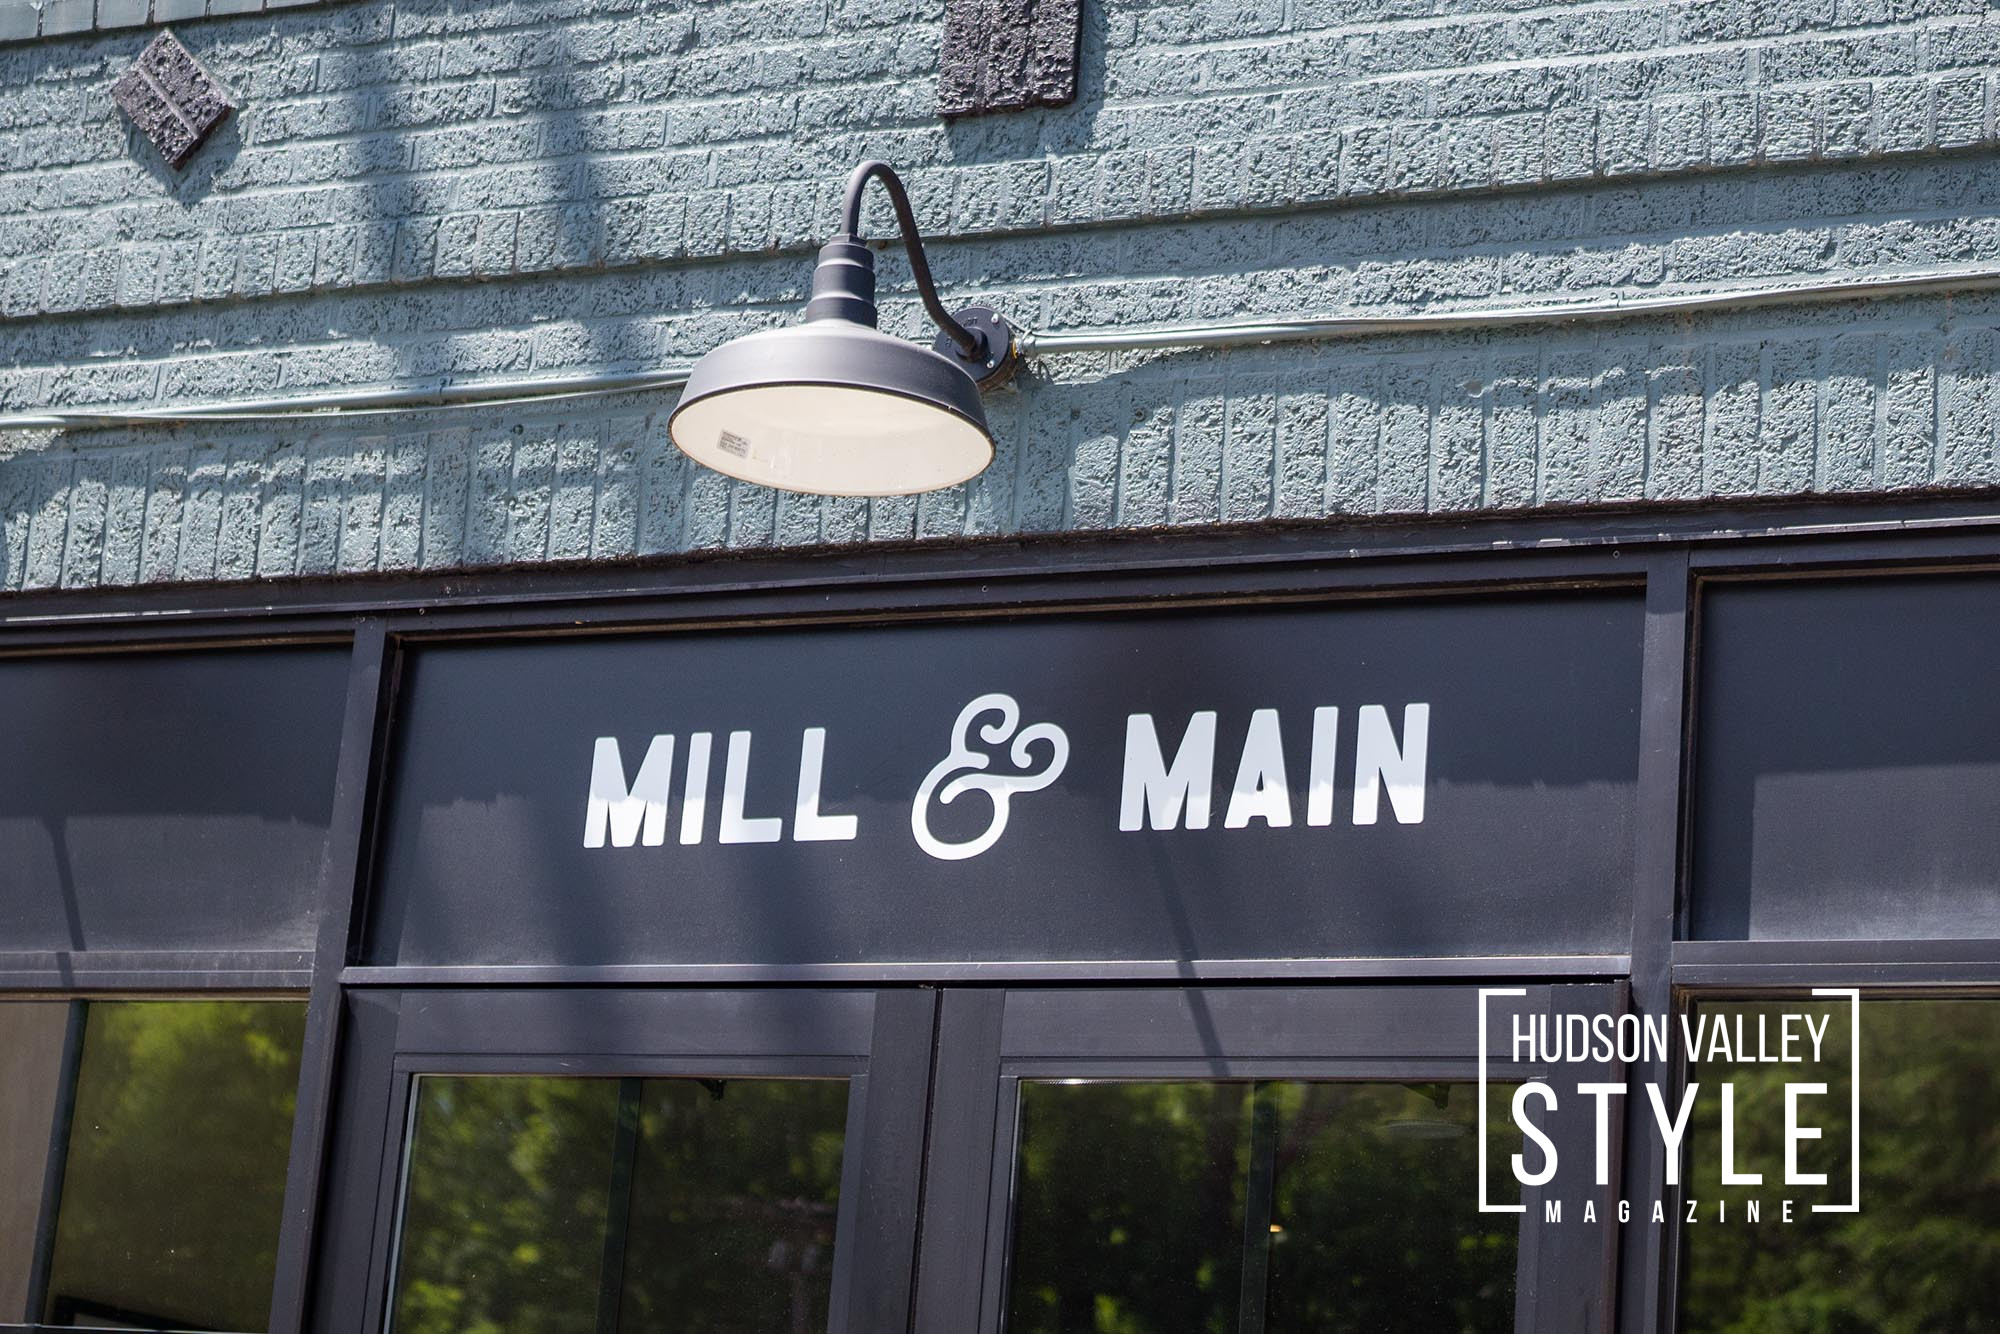 Mill & Main: A Brunch to Remember in Kerhonkson, NY – Restaurant Reviews with Maxwell Alexander – Presented by Alluvion Media